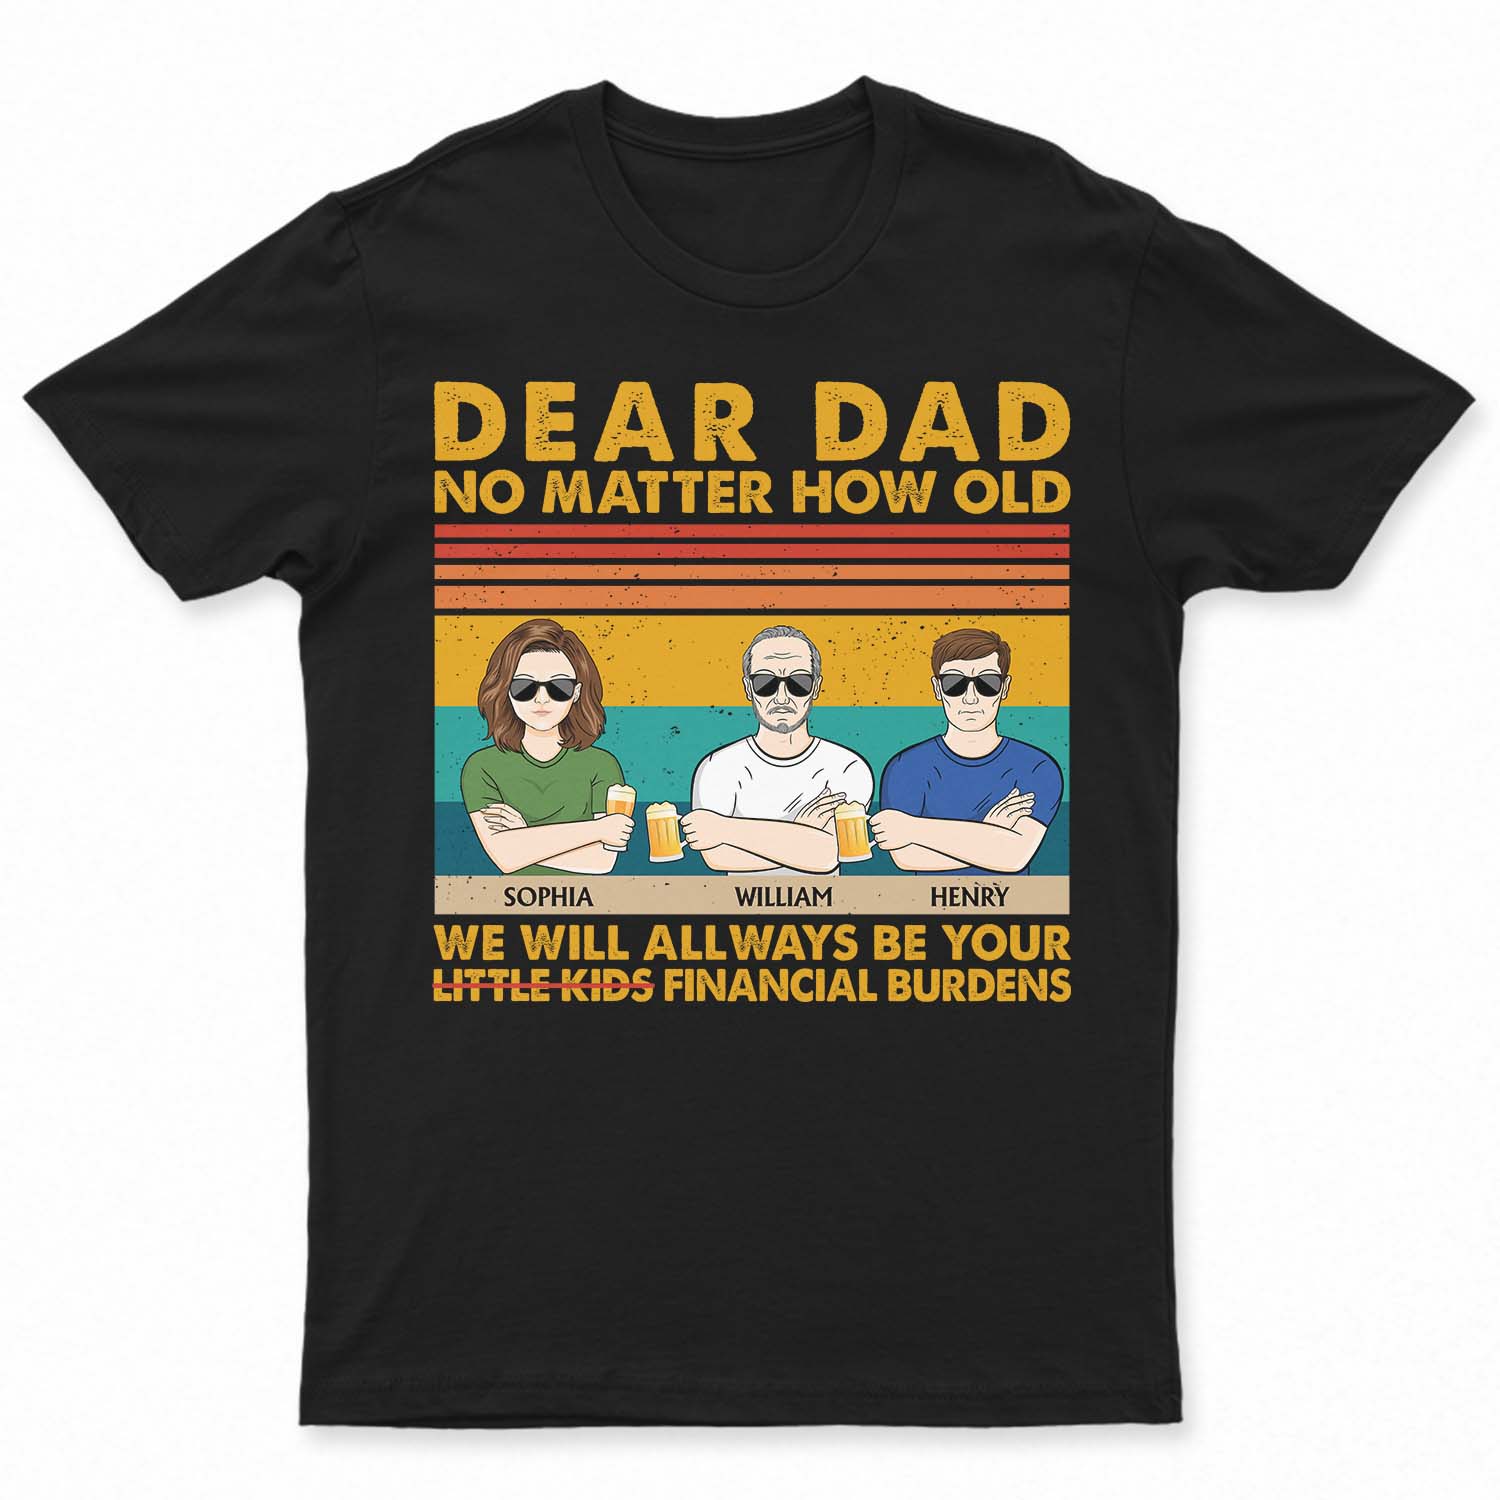 Dear Dad No Matter How Old I Will Always Be Your Financial Burden - Funny, Birthday Gift For Father, Husband - Personalized Custom T Shirt